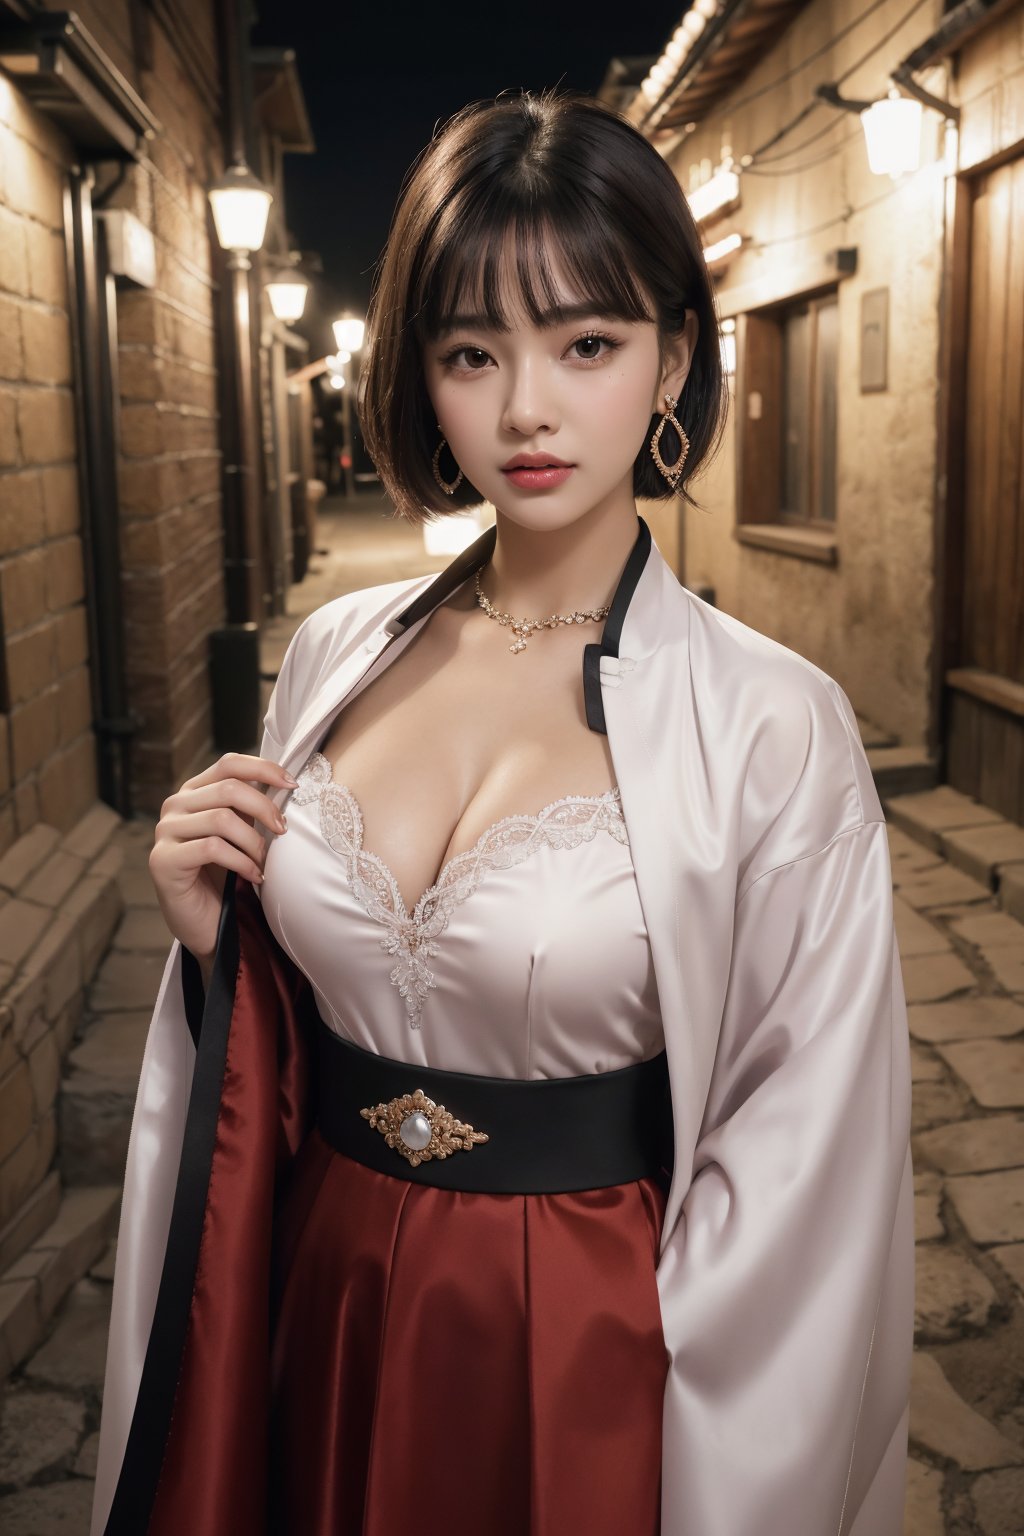 Best Quality, Aesthetics, Ultrafine, Complex Details, 4K, Animation Style, Outtis, Girl, Brown/Blonde, Black Eyes, Short Hair, Bangs, Jewels, Earrings, Piercing, Dark Skin, Big Chest, Cowboy Shot, Viewers, Alley, Outdoor, Red hanbok, Snowy Alley, Night,Breath, blush, 